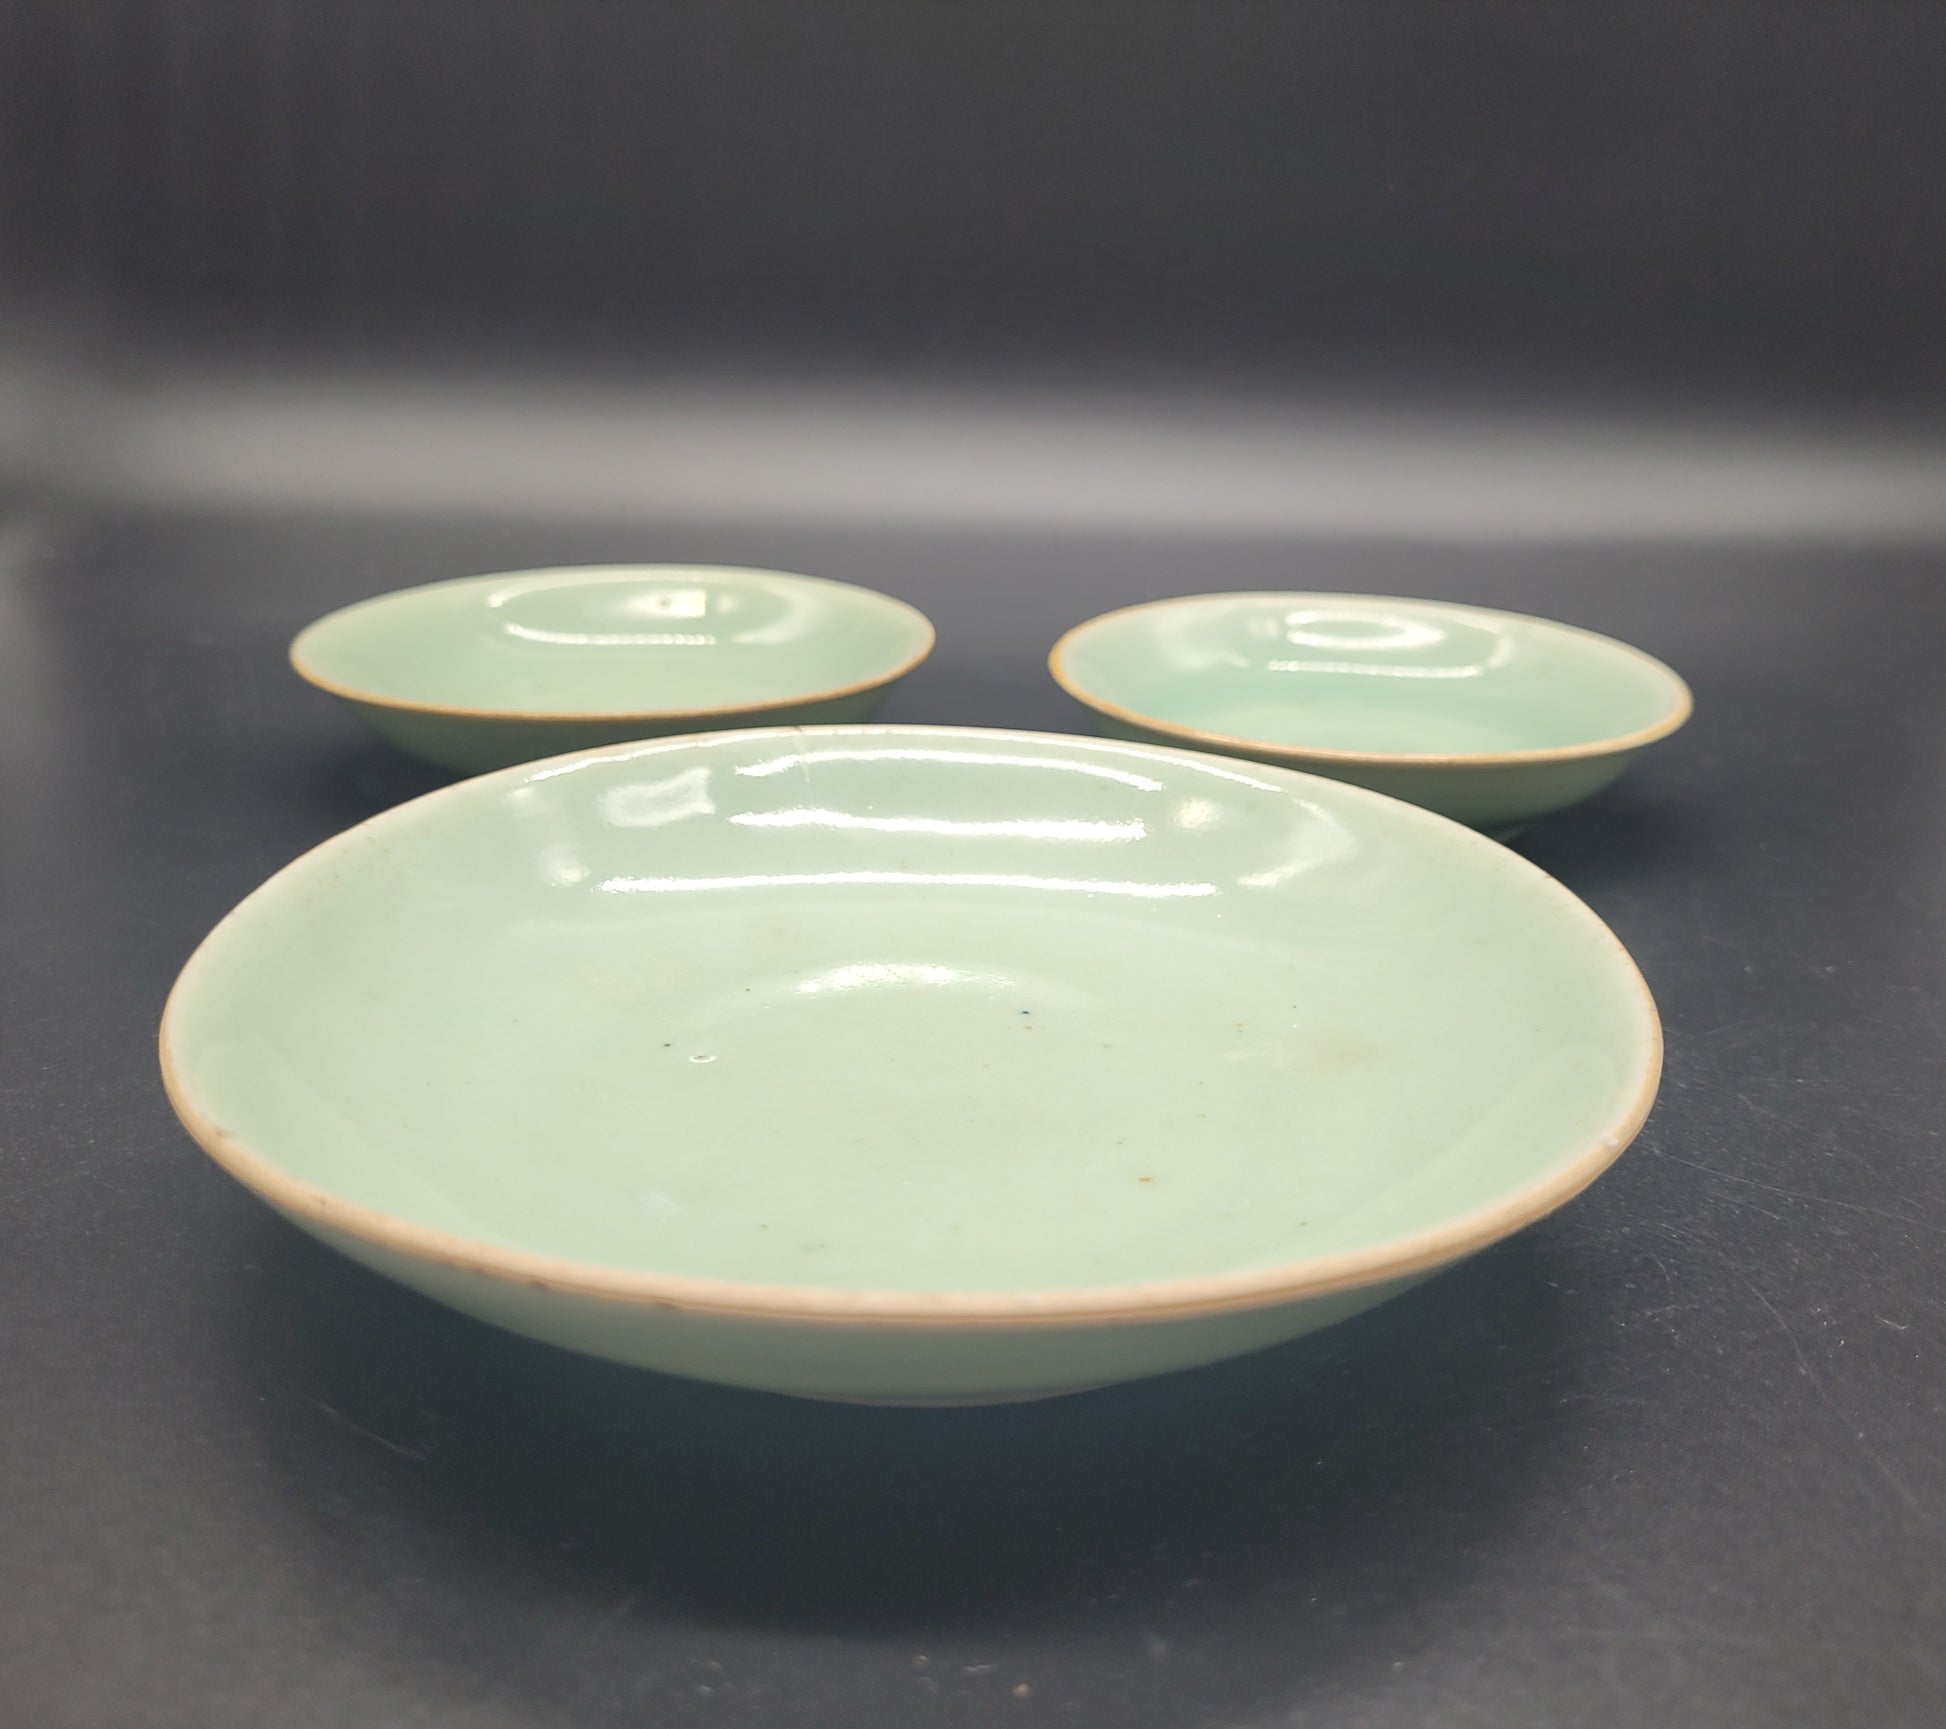 Buy antiques online Three Really Nice Antique Chinese Longquan Celadon Plates / Bowls 